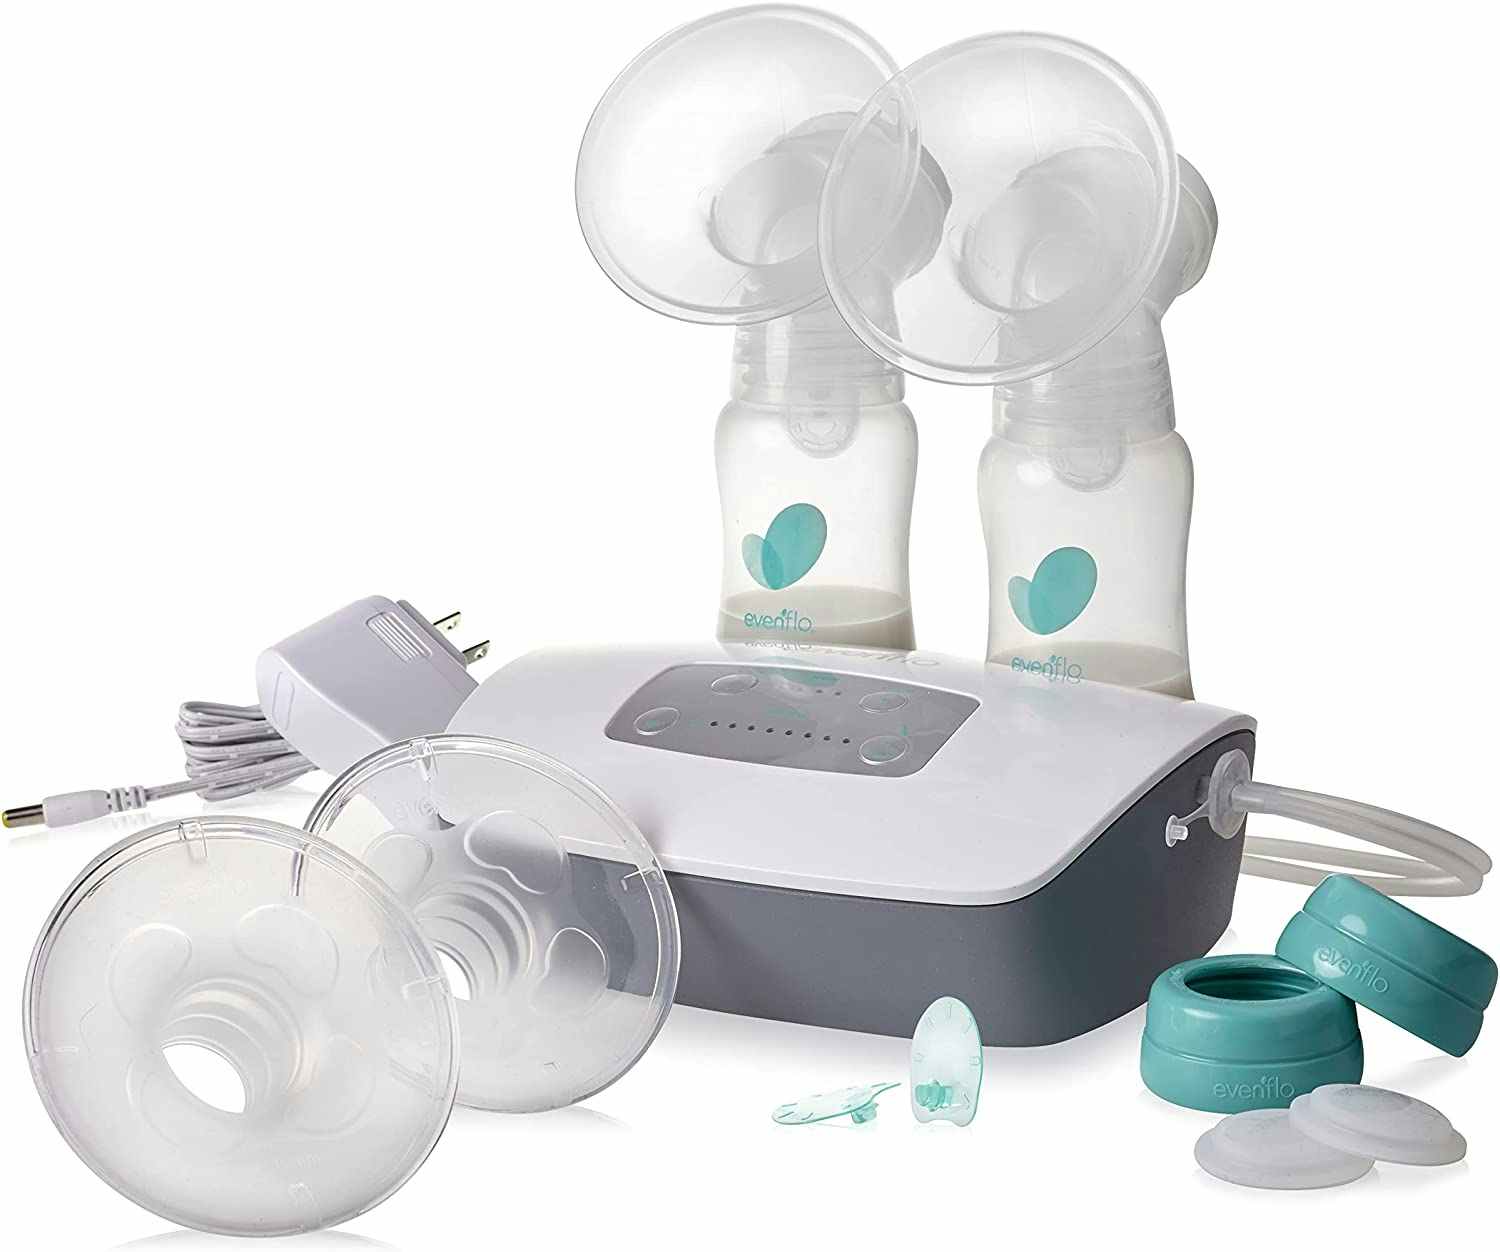 An Evenflo Deluxe Advanced breast pump on a white background.